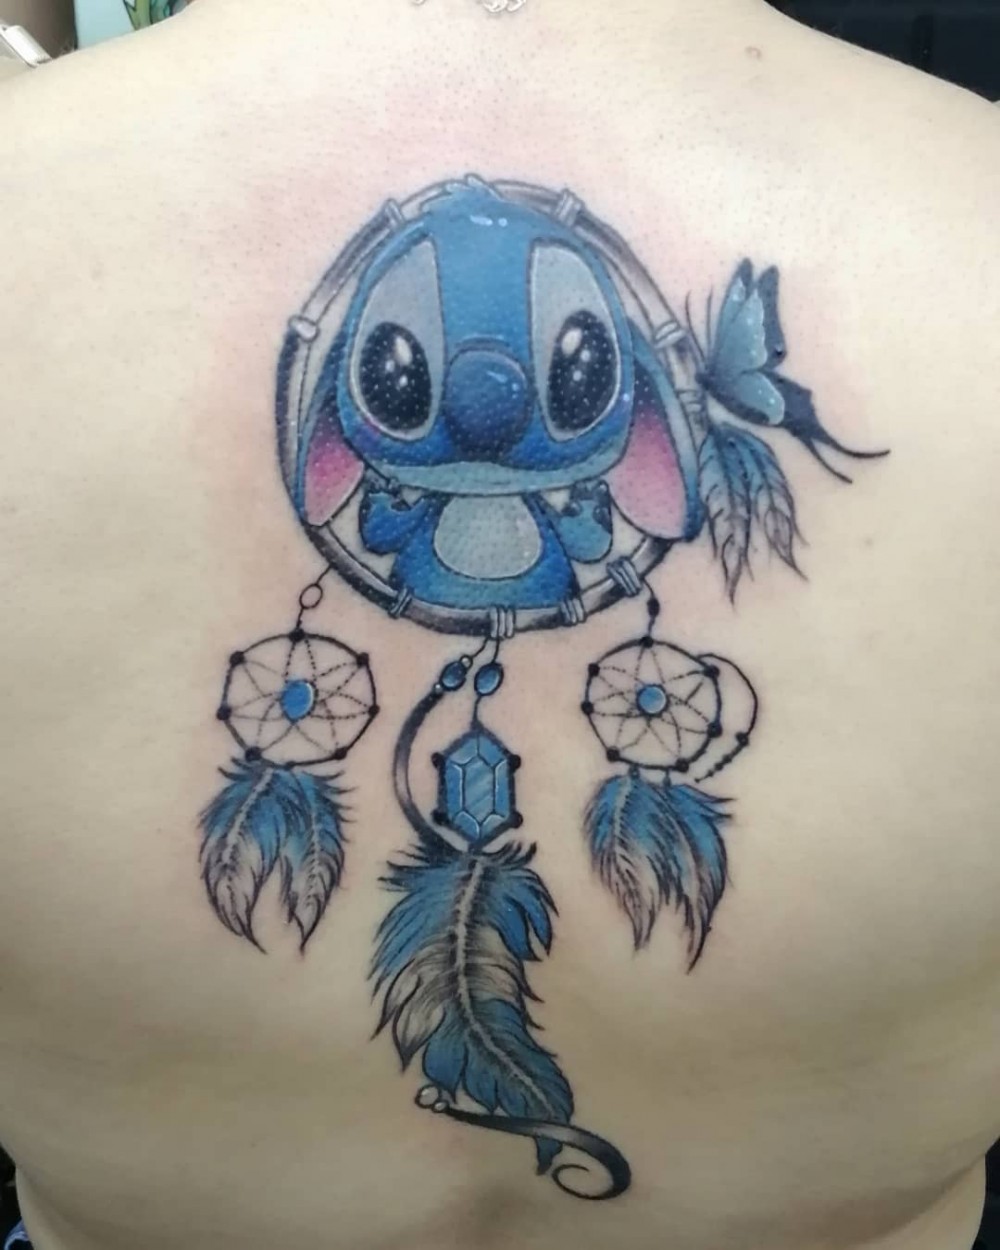 "Are These 62+ Cute Lilo And Stitch Ohana Family Disney Tattoos For You? stitch tattoo ohana lilo and stitch tattoo sleeve lilo and stitch matching tattoosstitch tattoo ohana lilo and stitch tattoo black and white lilo and stitch tattoo quotes stitches tattoo meaning stitch and angel tattoo lilo and stitch temporary tattoo evil stitch tattoo ohana tattoo disney tattoos toothless tattoo stitch drawing stitch tattoo thigh stitch couple tattoo ohana tattoo with stitch ohana family tattoo ohana tattoo male ohana tattoo disney font lilo and stitch tattoo ohana tattoo collarbone ohana stitch tattoo ohana meaning family tattoos ohana means family"